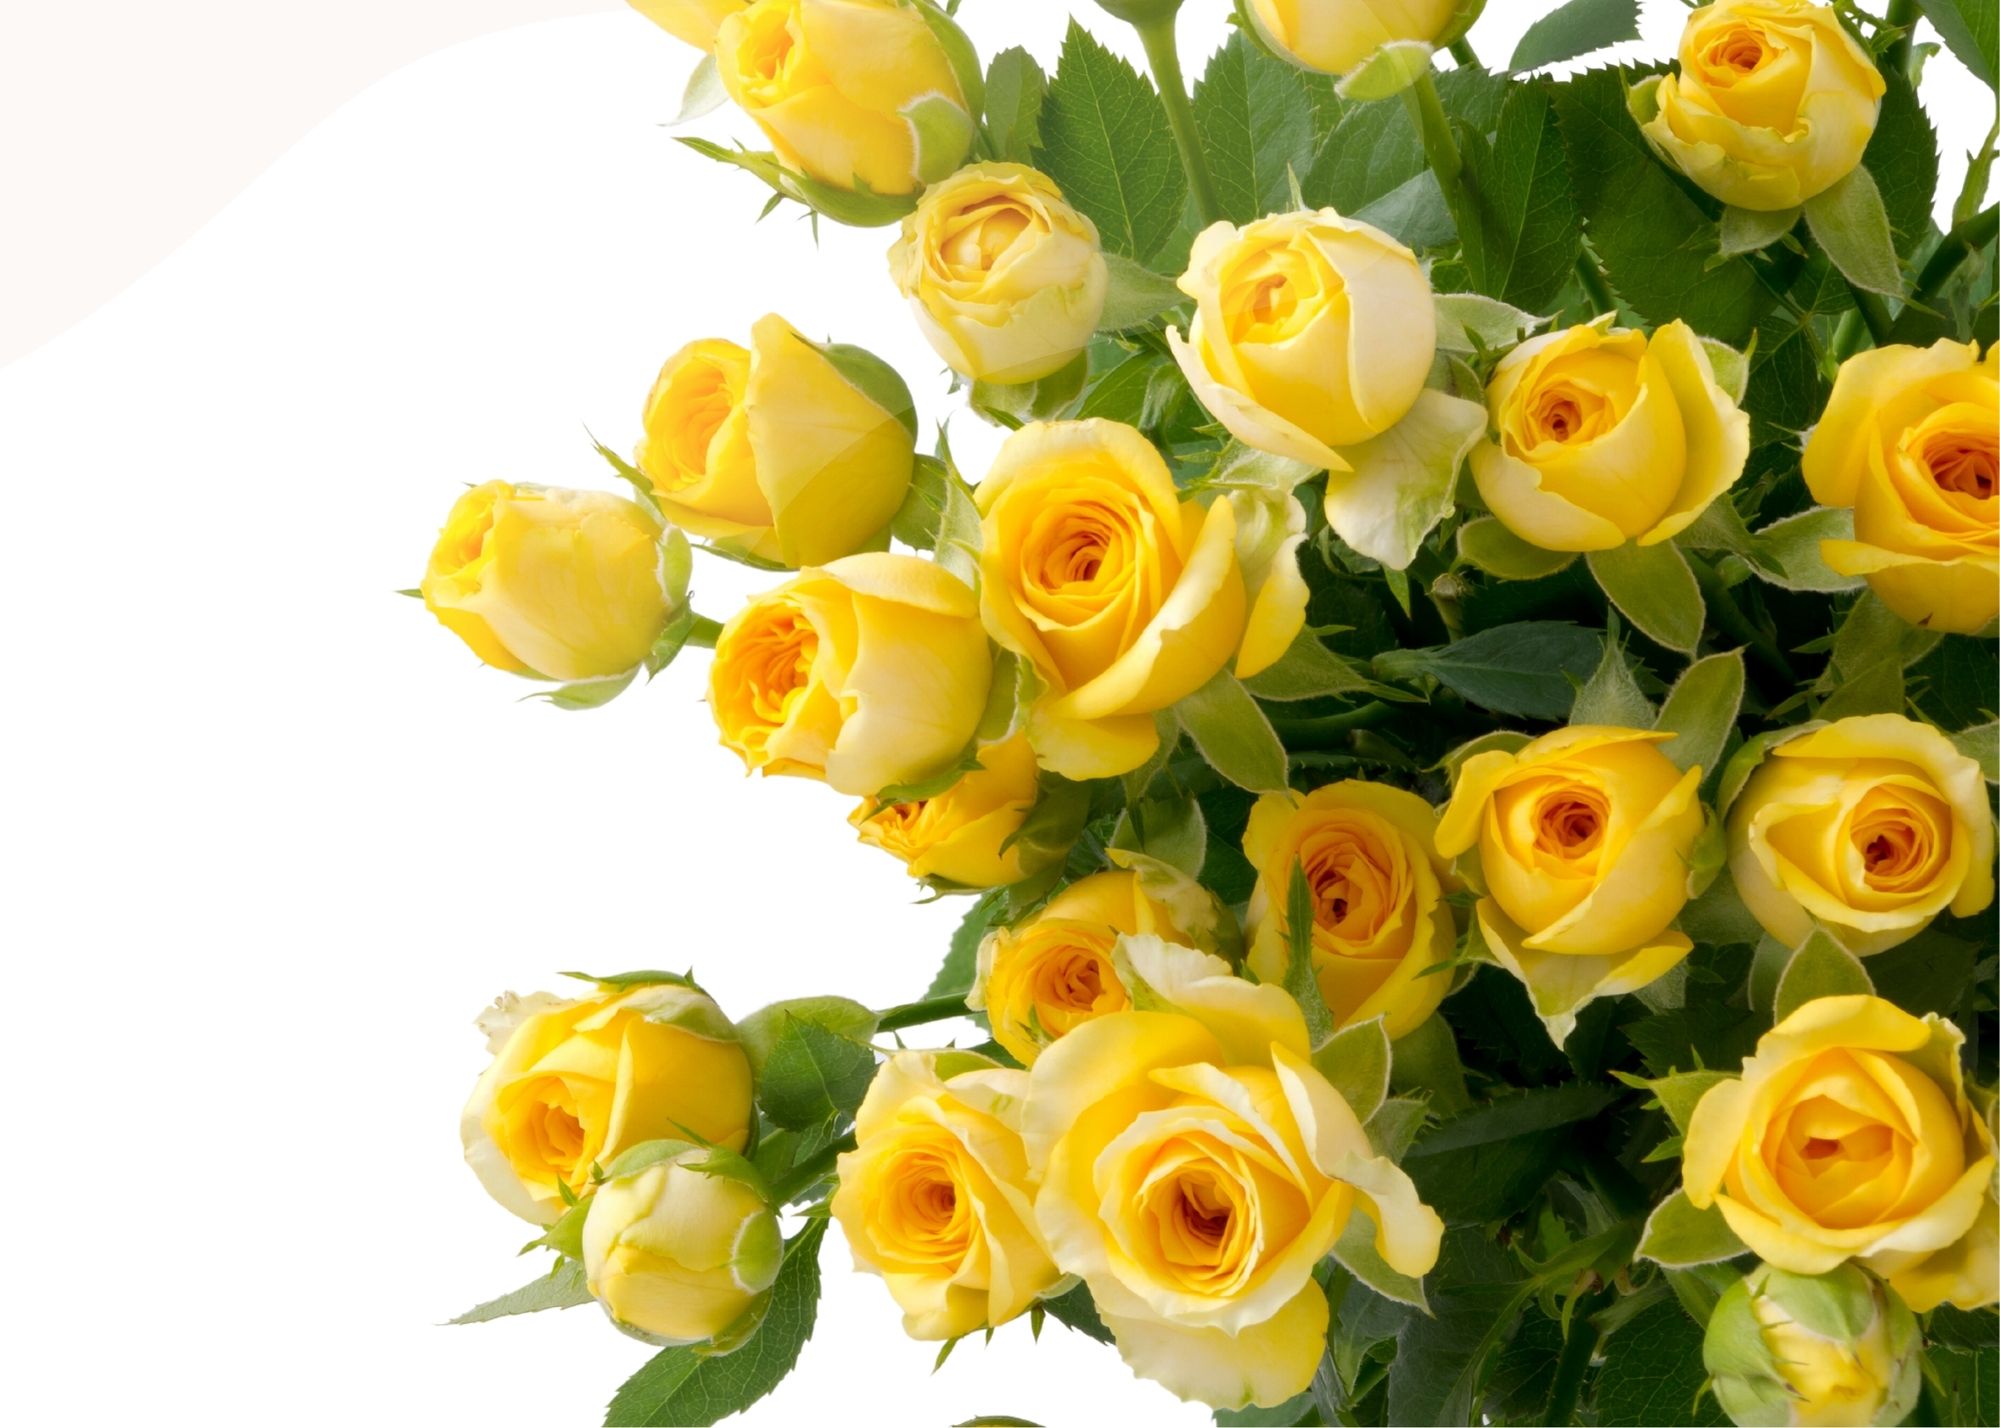 A picture of yellow roses